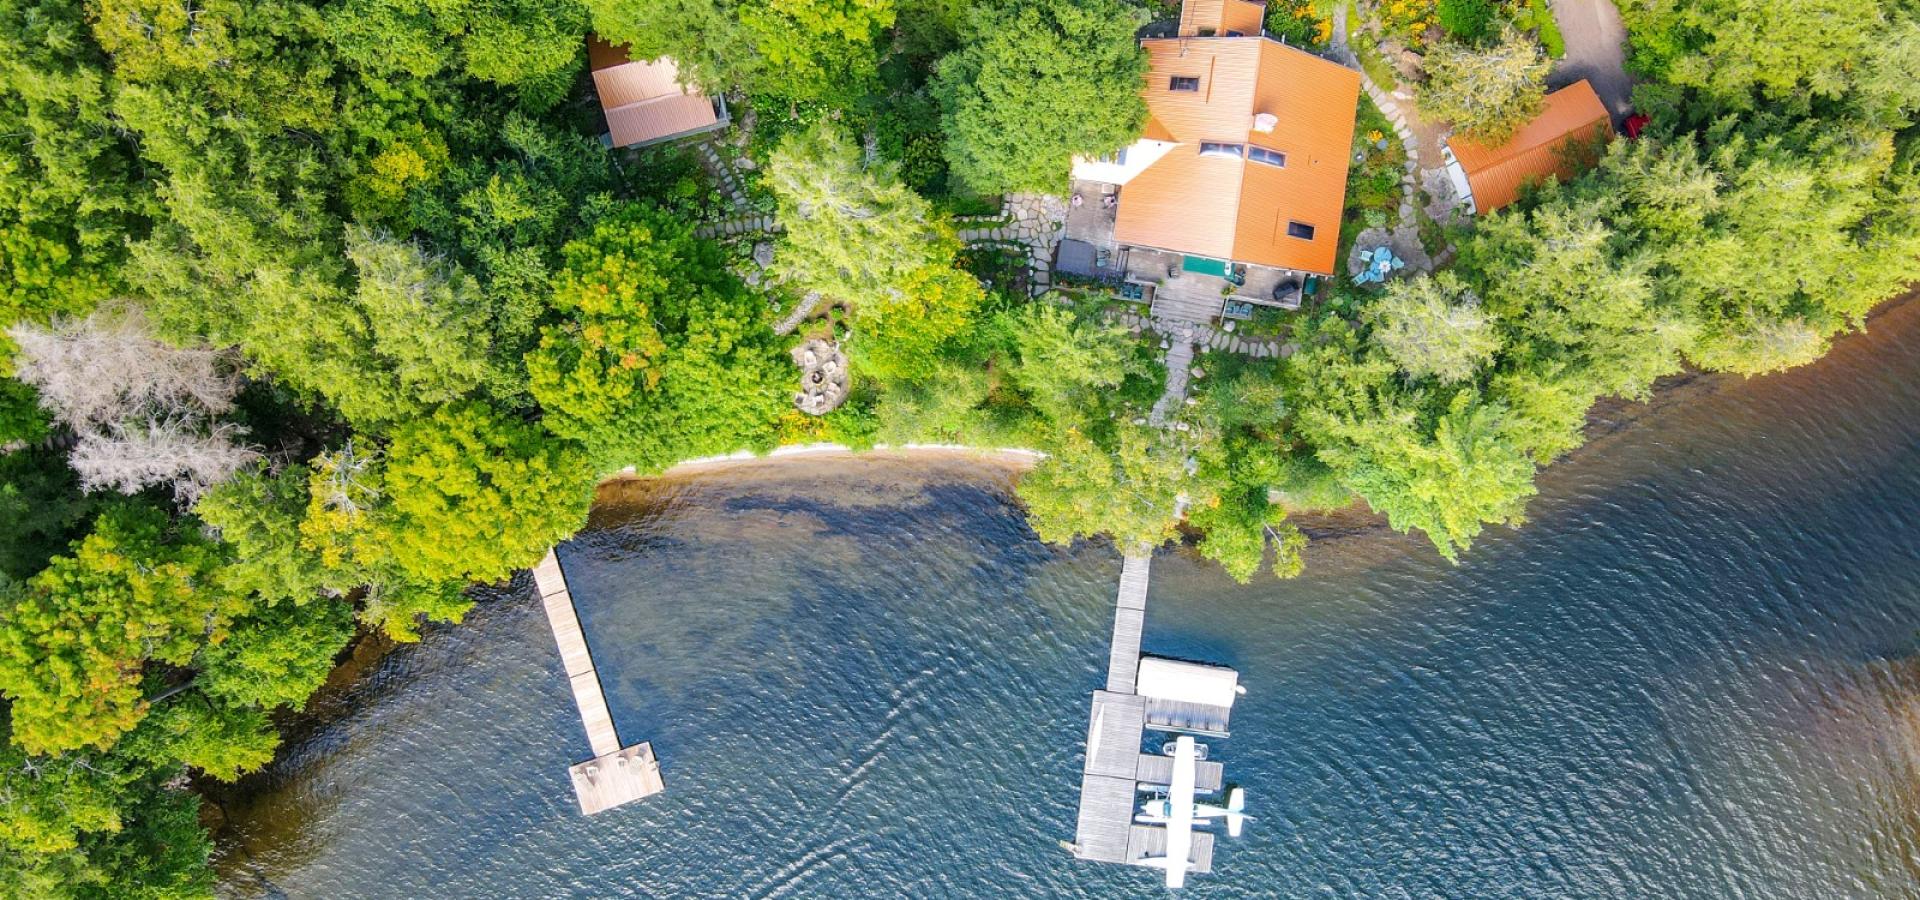 Two cottages surrounded my green trees and with a sandy shore line. Two docks out into the lake. 